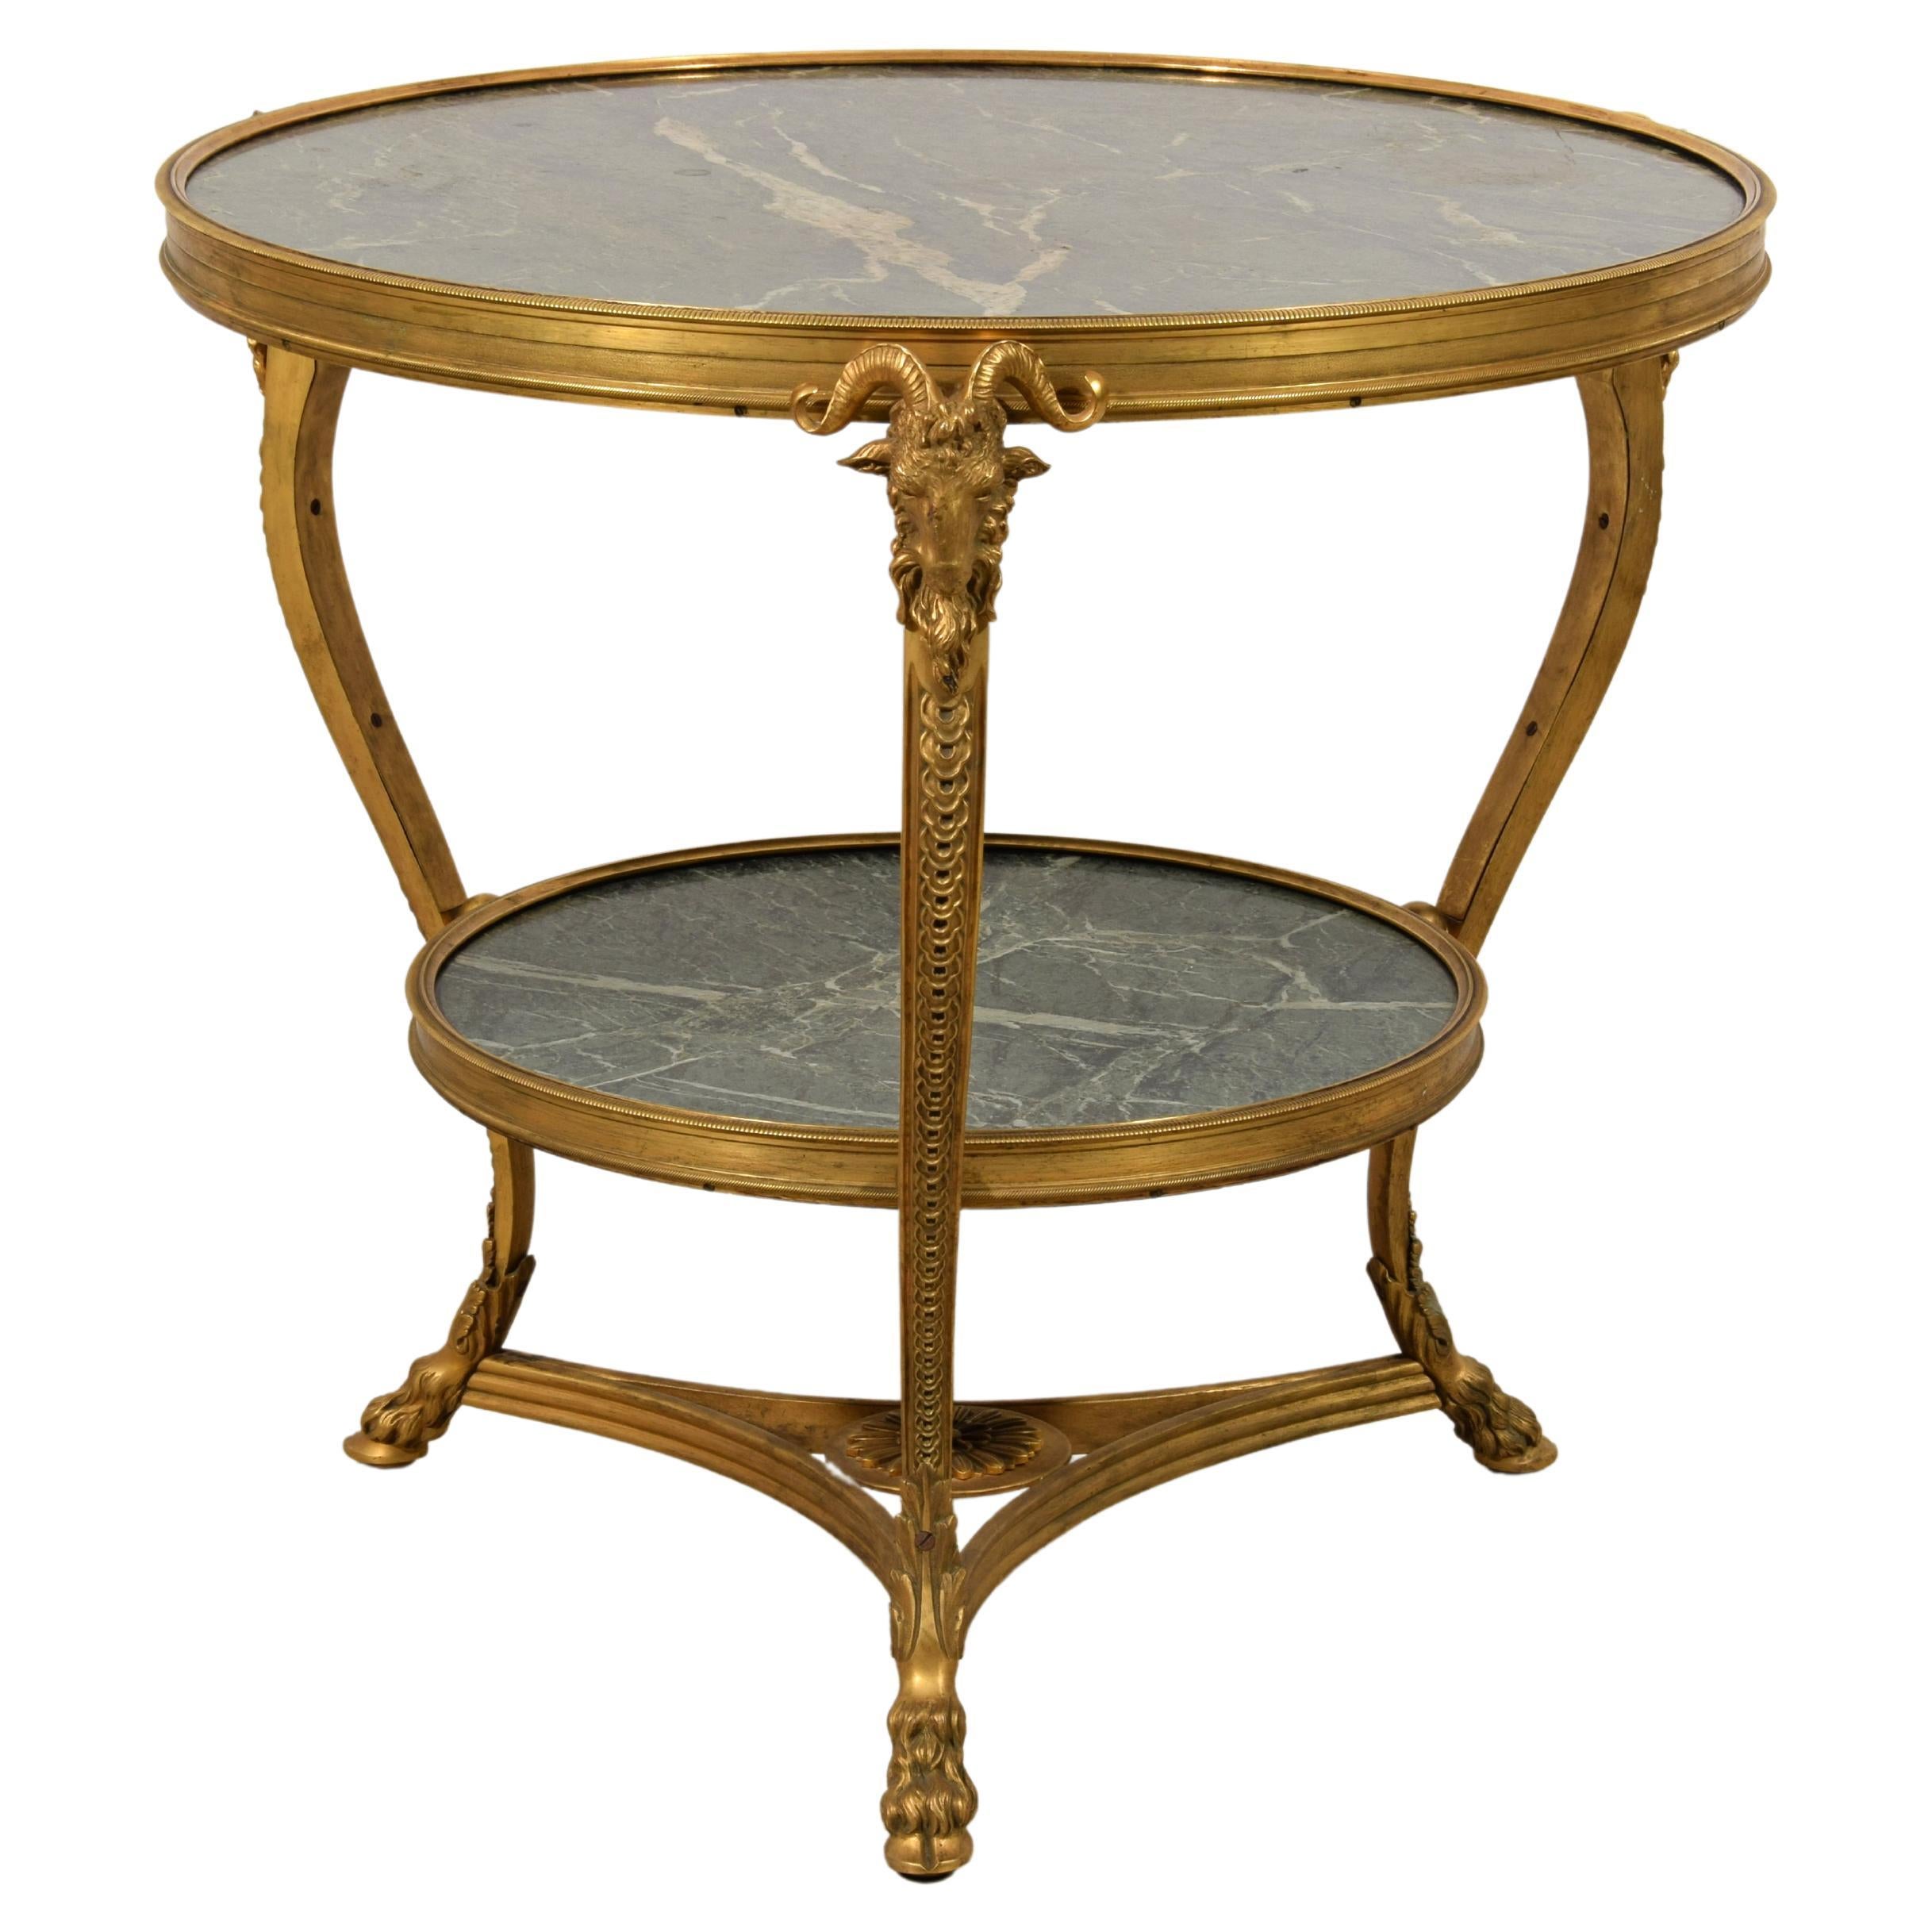 20th Century, French Gilt Bronze Coffee Table with Marble Tops